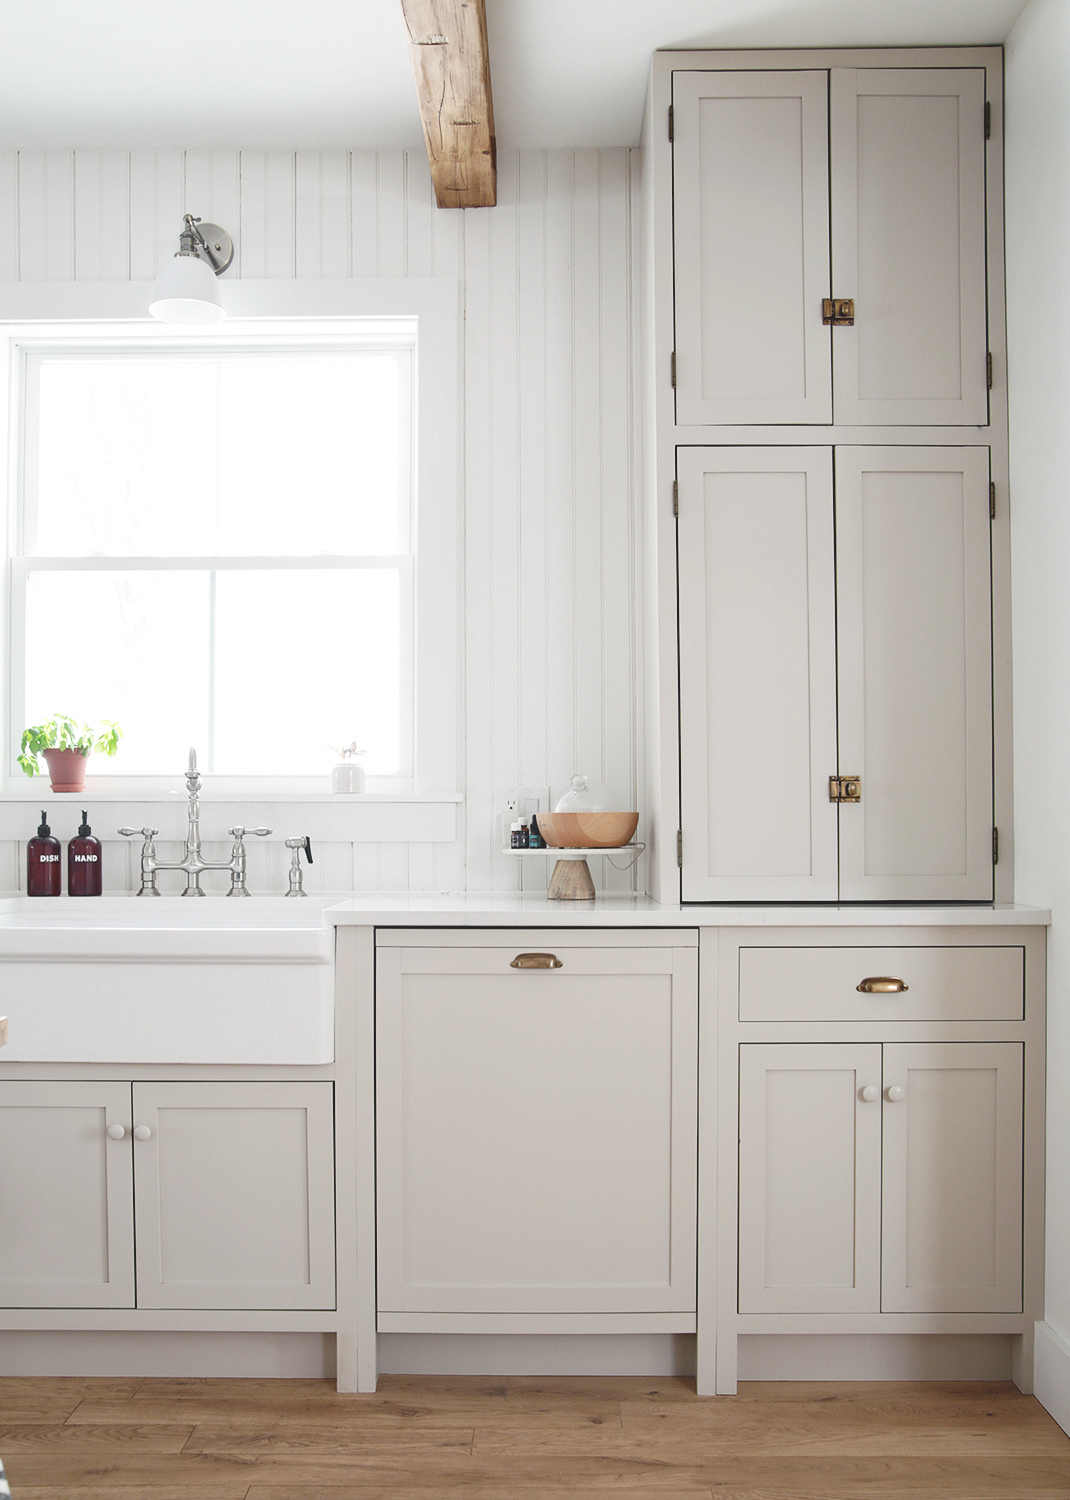 inspired by devol’s real shaker design, manda wanted inset cabinets 15